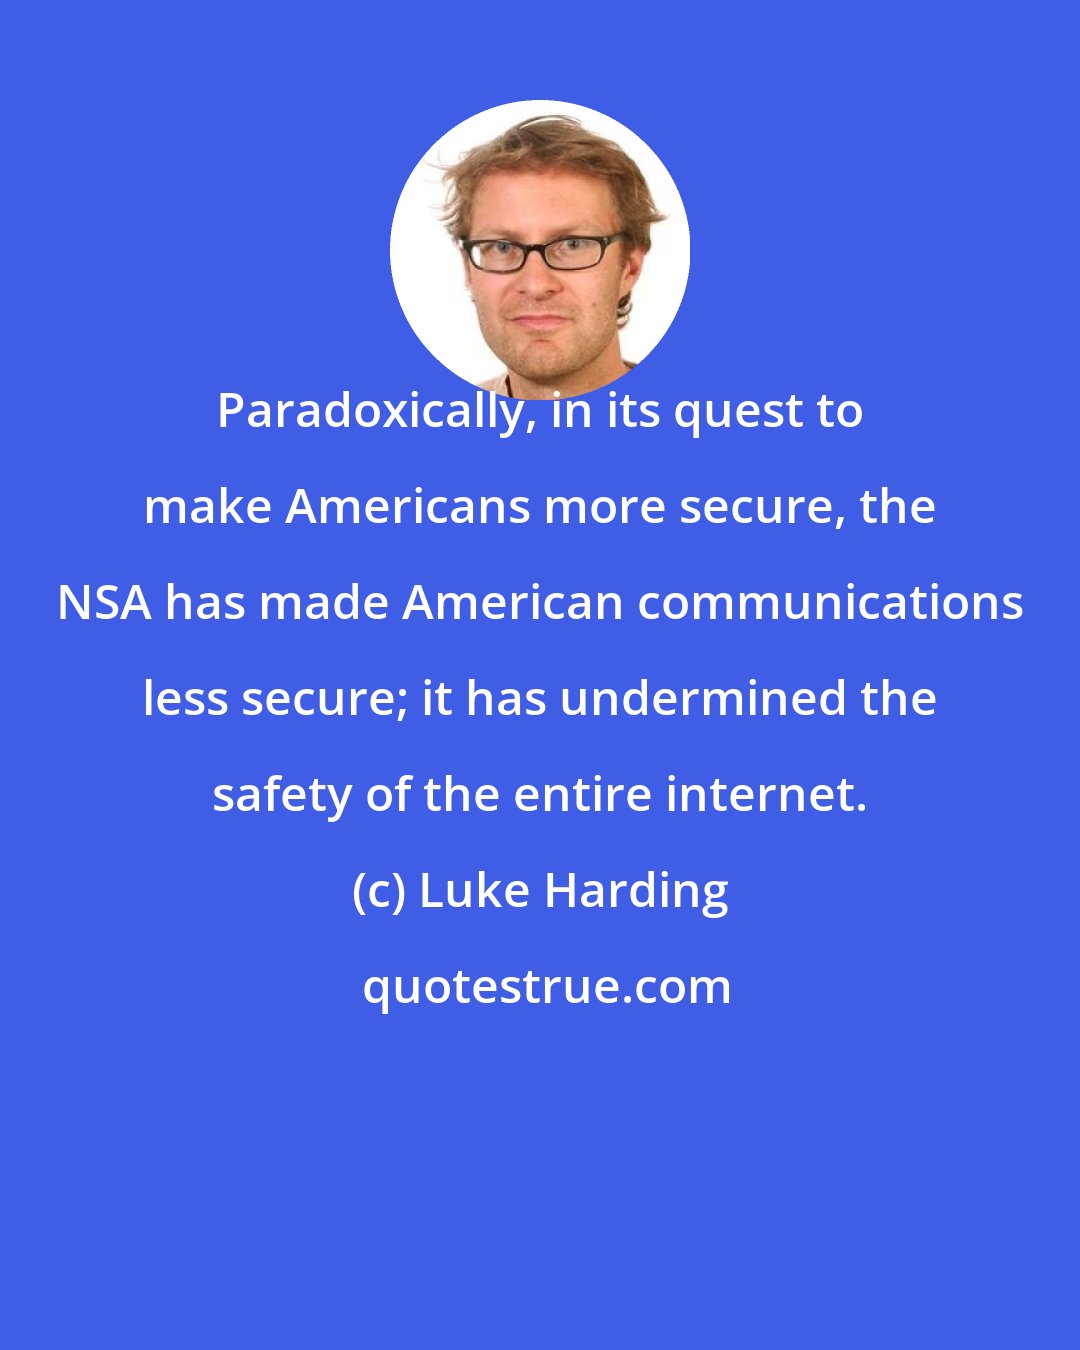 Luke Harding: Paradoxically, in its quest to make Americans more secure, the NSA has made American communications less secure; it has undermined the safety of the entire internet.